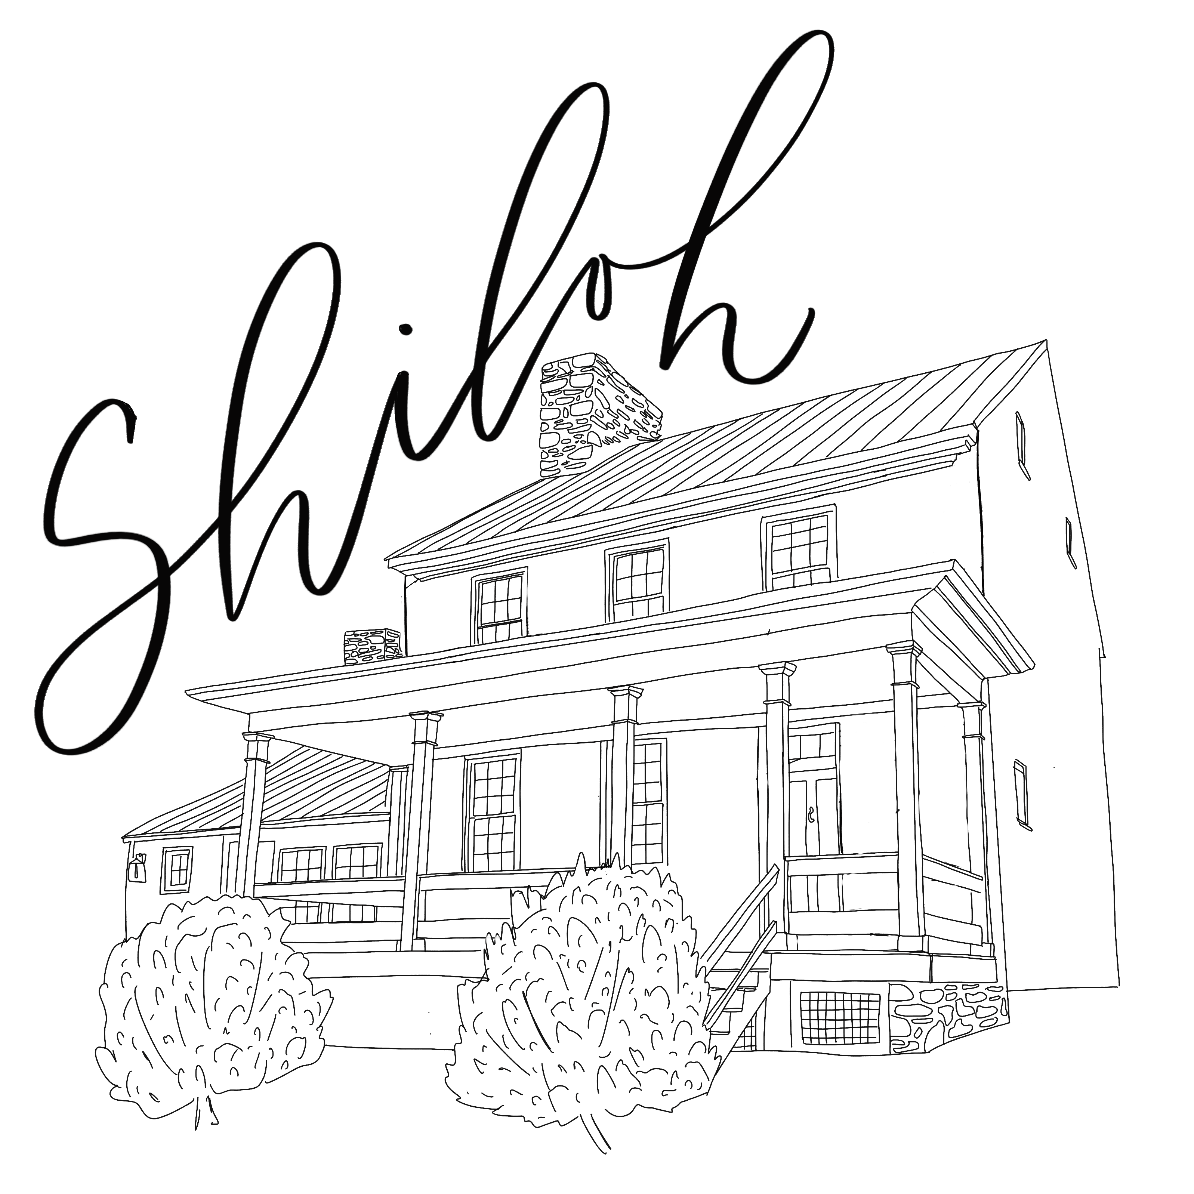 Stay at Shiloh